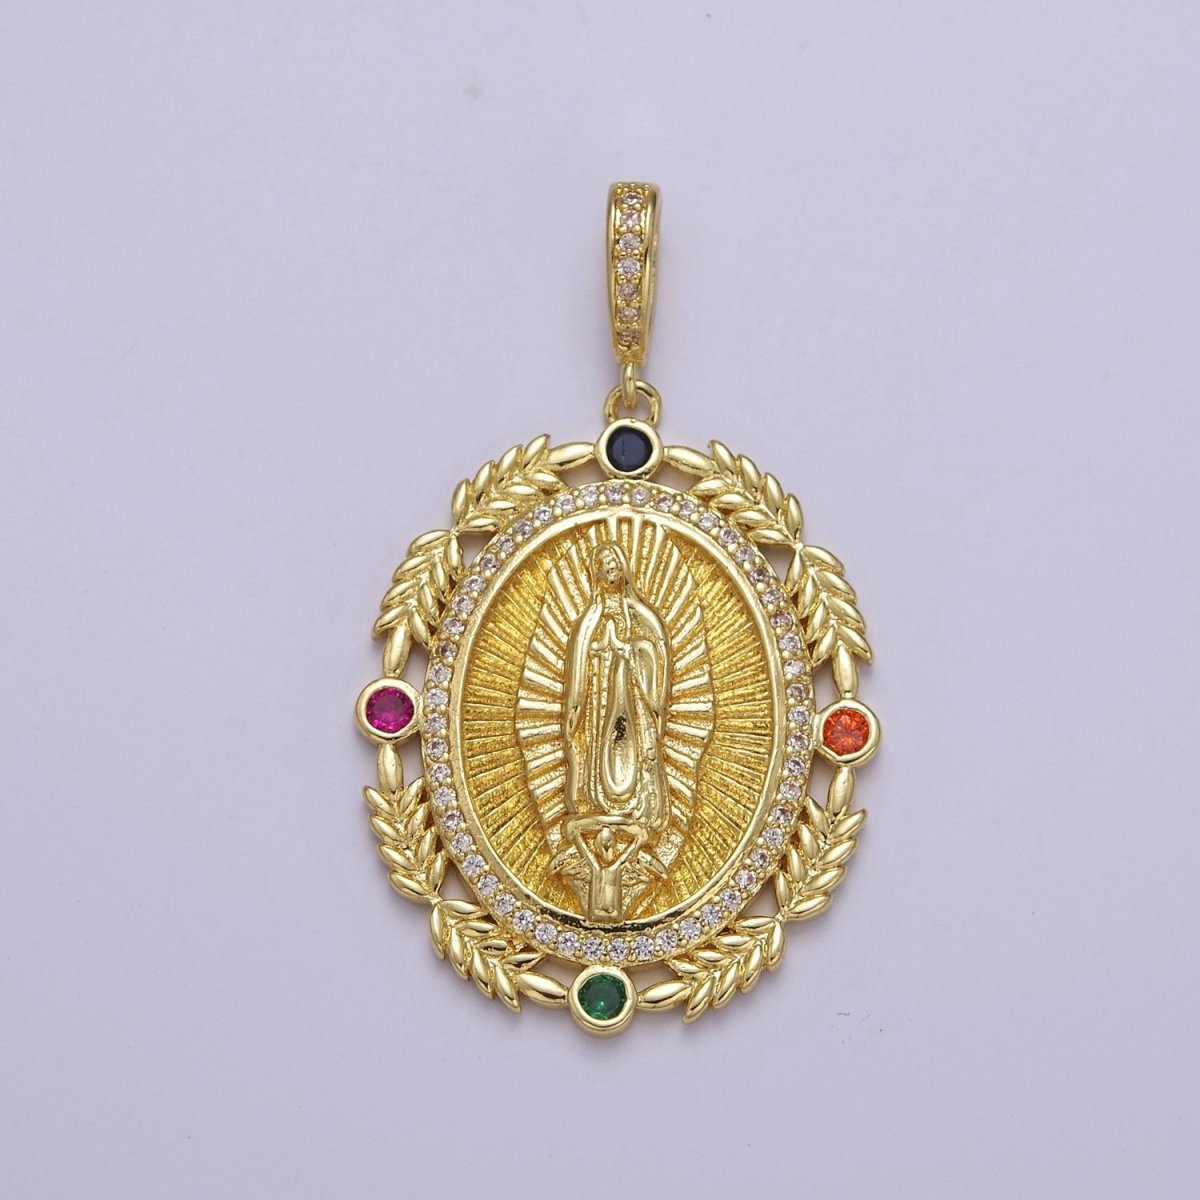 24K Gold Filled Virgin Mary Pendant Gold Lady Guadalupe Medallion Charm for Religious Necklace J-735 - DLUXCA